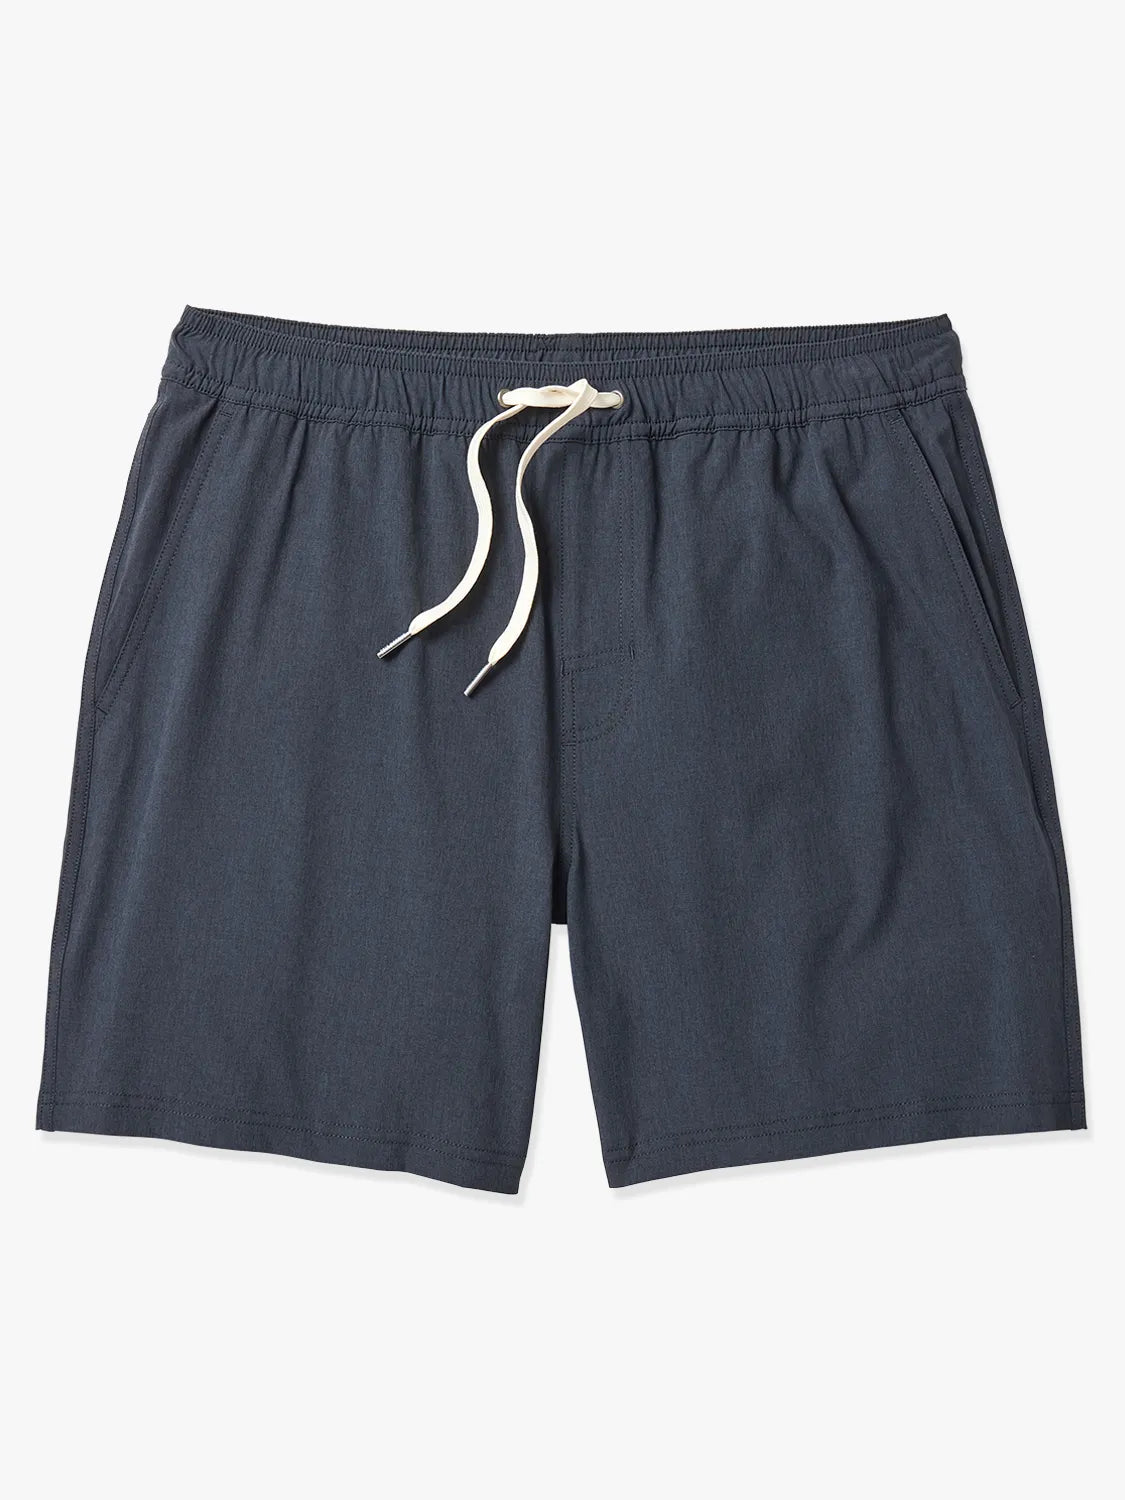 The One Short | Navy - S / 6 / Liner